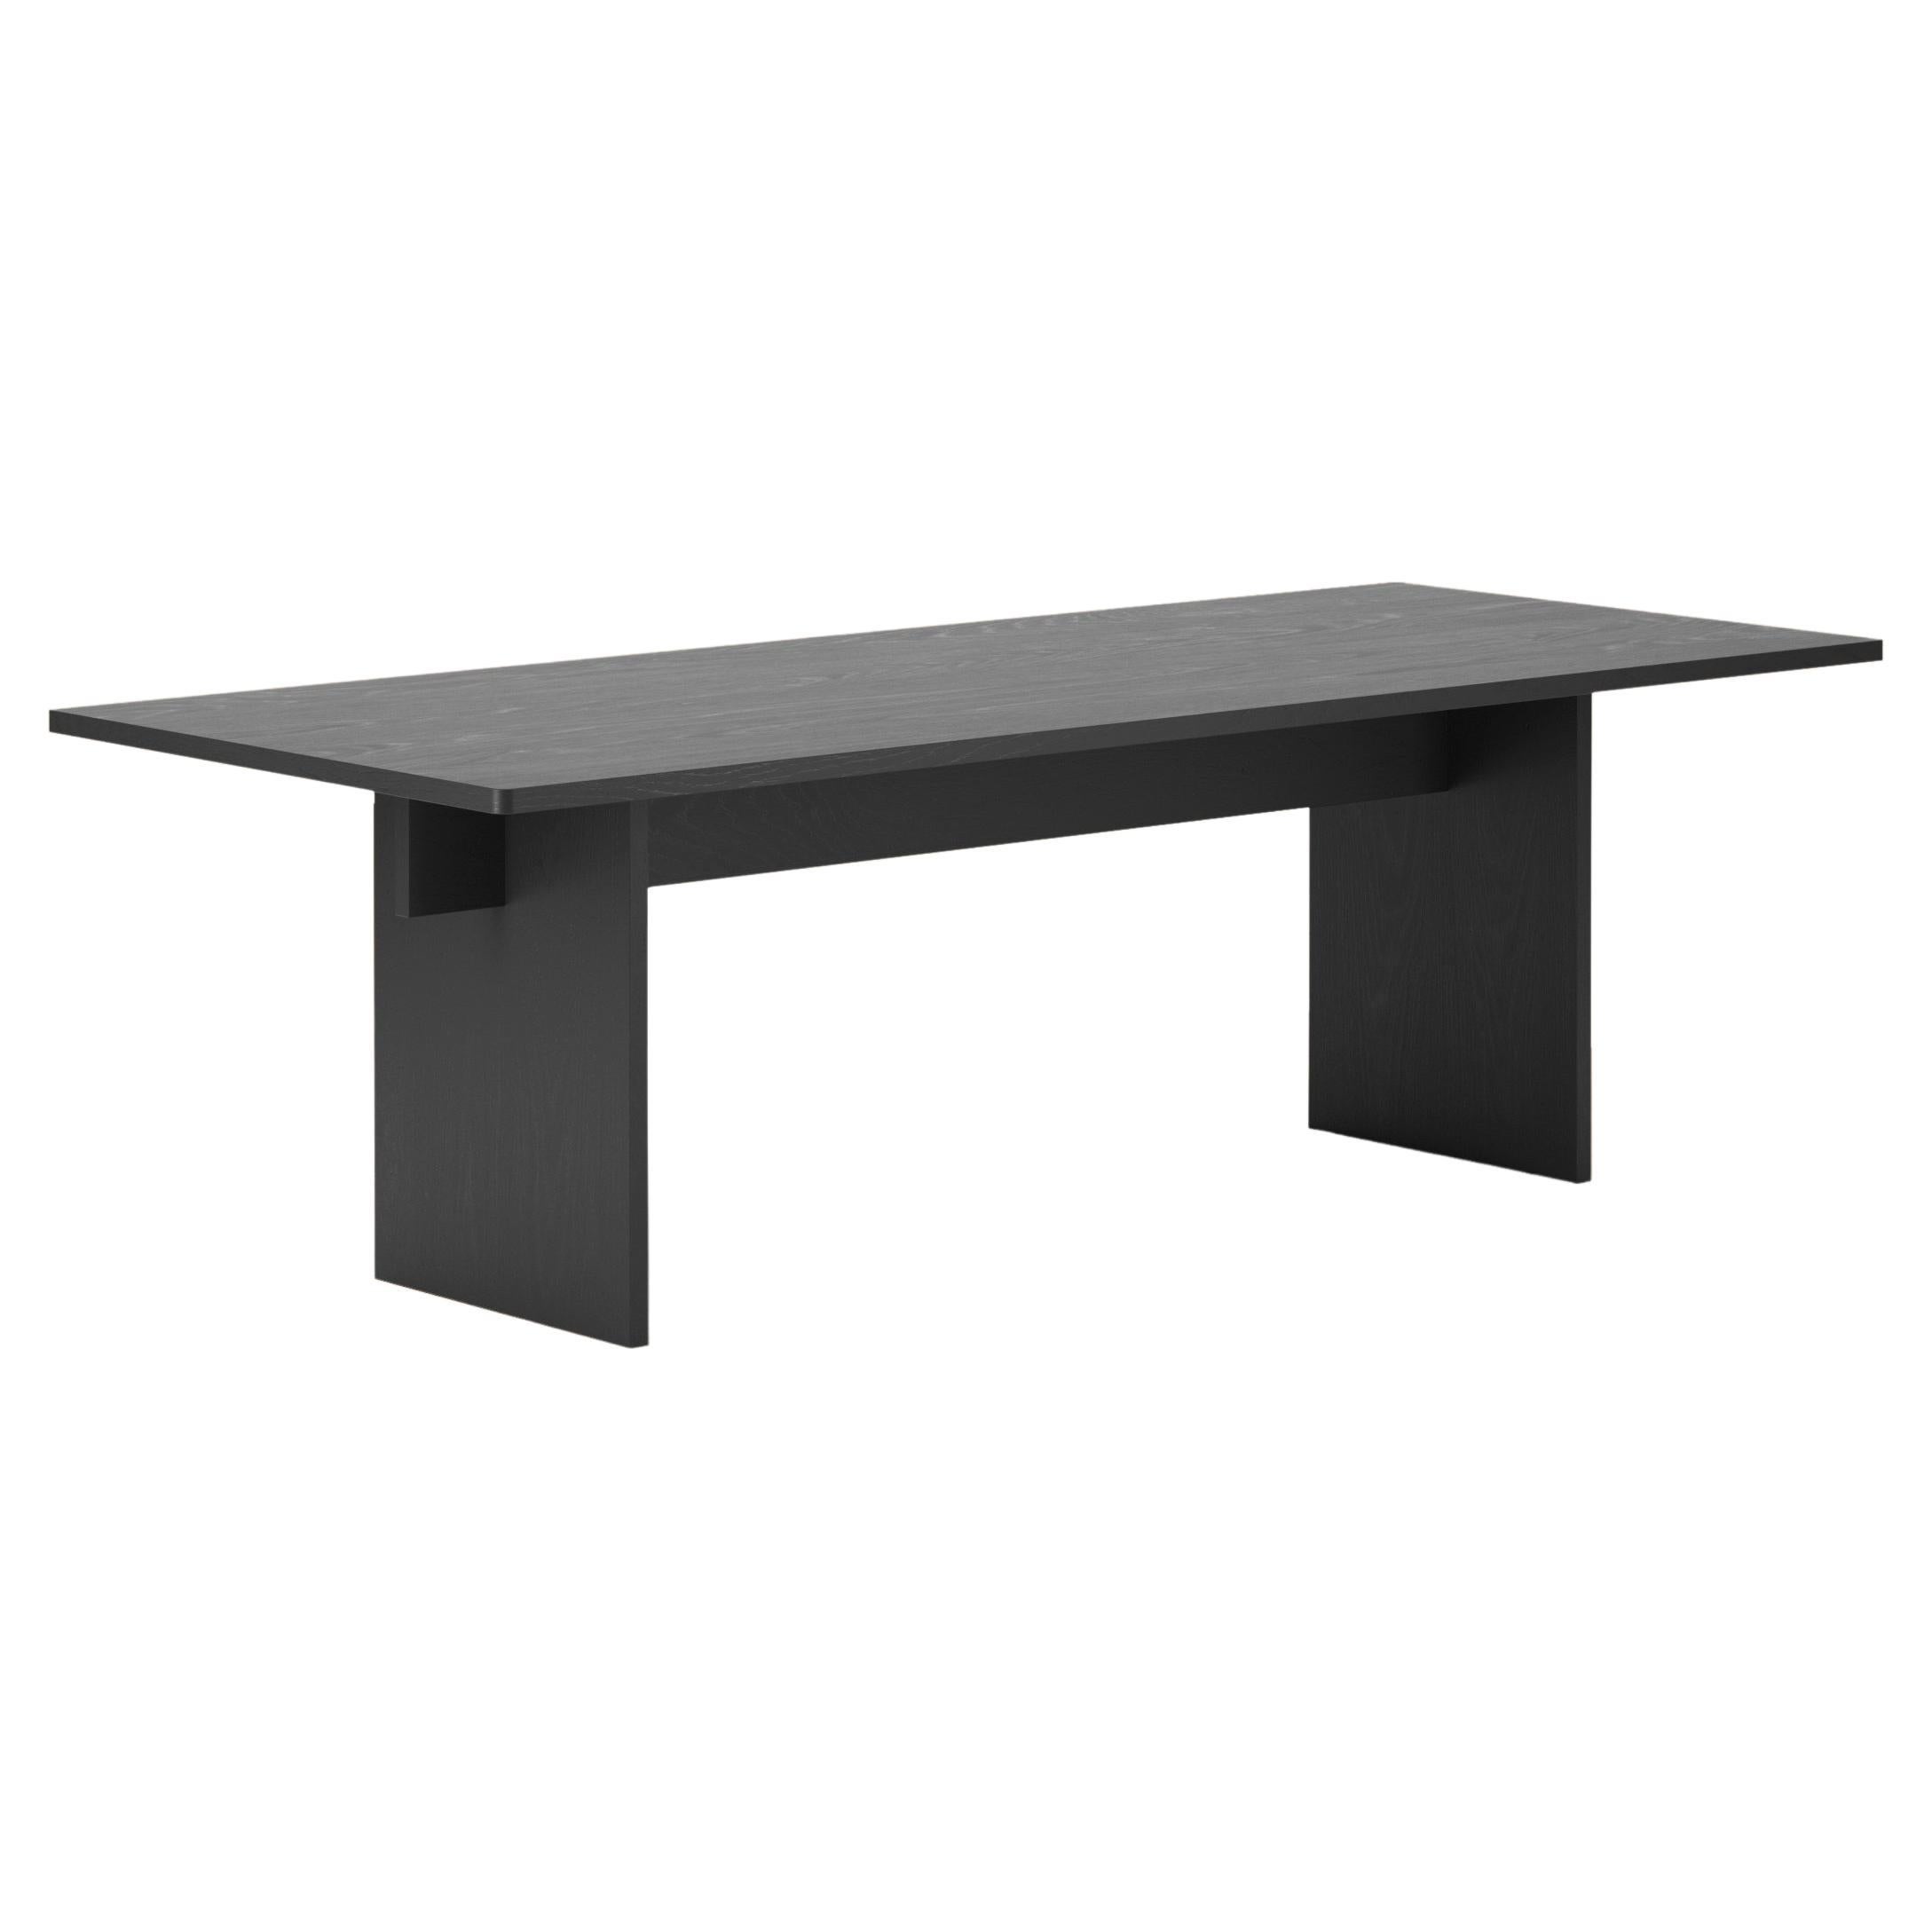 6 Seater Faure Table Handcrafted in Blackened Oiled Oak by Lemon